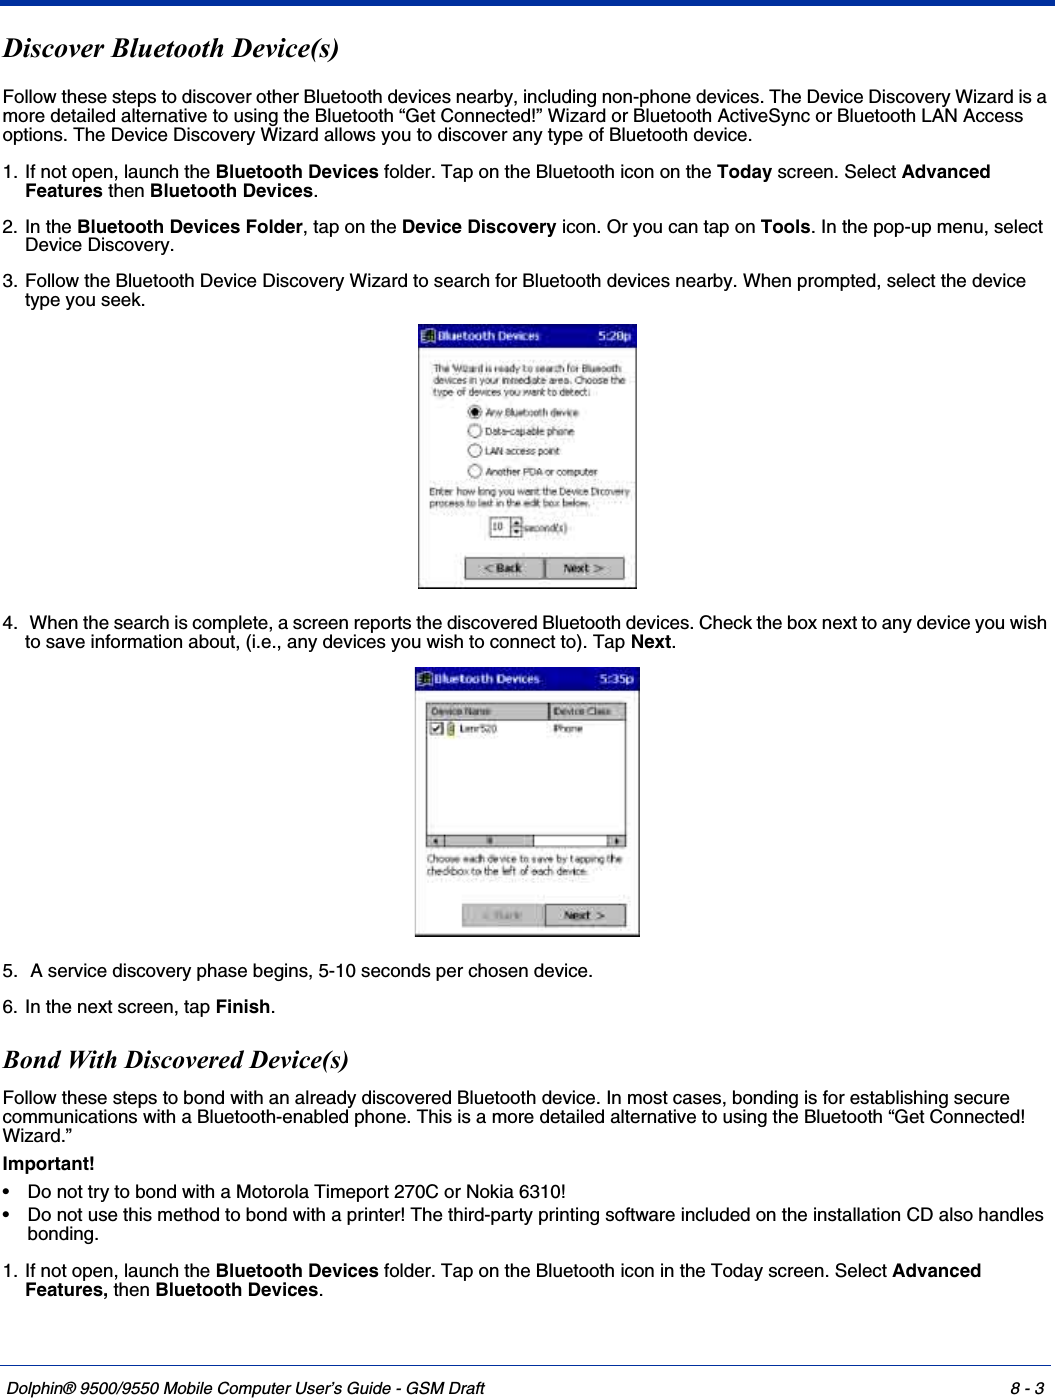 Dolphin® 9500/9550 Mobile Computer User’s Guide - GSM Draft 8 - 3Discover Bluetooth Device(s)Follow these steps to discover other Bluetooth devices nearby, including non-phone devices. The Device Discovery Wizard is a more detailed alternative to using the Bluetooth “Get Connected!” Wizard or Bluetooth ActiveSync or Bluetooth LAN Access options. The Device Discovery Wizard allows you to discover any type of Bluetooth device.1. If not open, launch the Bluetooth Devices folder. Tap on the Bluetooth icon on the Today screen. Select Advanced Features then Bluetooth Devices.2. In the Bluetooth Devices Folder, tap on the Device Discovery icon. Or you can tap on Tools. In the pop-up menu, select Device Discovery.3. Follow the Bluetooth Device Discovery Wizard to search for Bluetooth devices nearby. When prompted, select the device type you seek.4.  When the search is complete, a screen reports the discovered Bluetooth devices. Check the box next to any device you wish to save information about, (i.e., any devices you wish to connect to). Tap Next.5.  A service discovery phase begins, 5-10 seconds per chosen device.6. In the next screen, tap Finish.Bond With Discovered Device(s)Follow these steps to bond with an already discovered Bluetooth device. In most cases, bonding is for establishing secure communications with a Bluetooth-enabled phone. This is a more detailed alternative to using the Bluetooth “Get Connected! Wizard.”Important!• Do not try to bond with a Motorola Timeport 270C or Nokia 6310!• Do not use this method to bond with a printer! The third-party printing software included on the installation CD also handles bonding.1. If not open, launch the Bluetooth Devices folder. Tap on the Bluetooth icon in the Today screen. Select Advanced Features, then Bluetooth Devices.